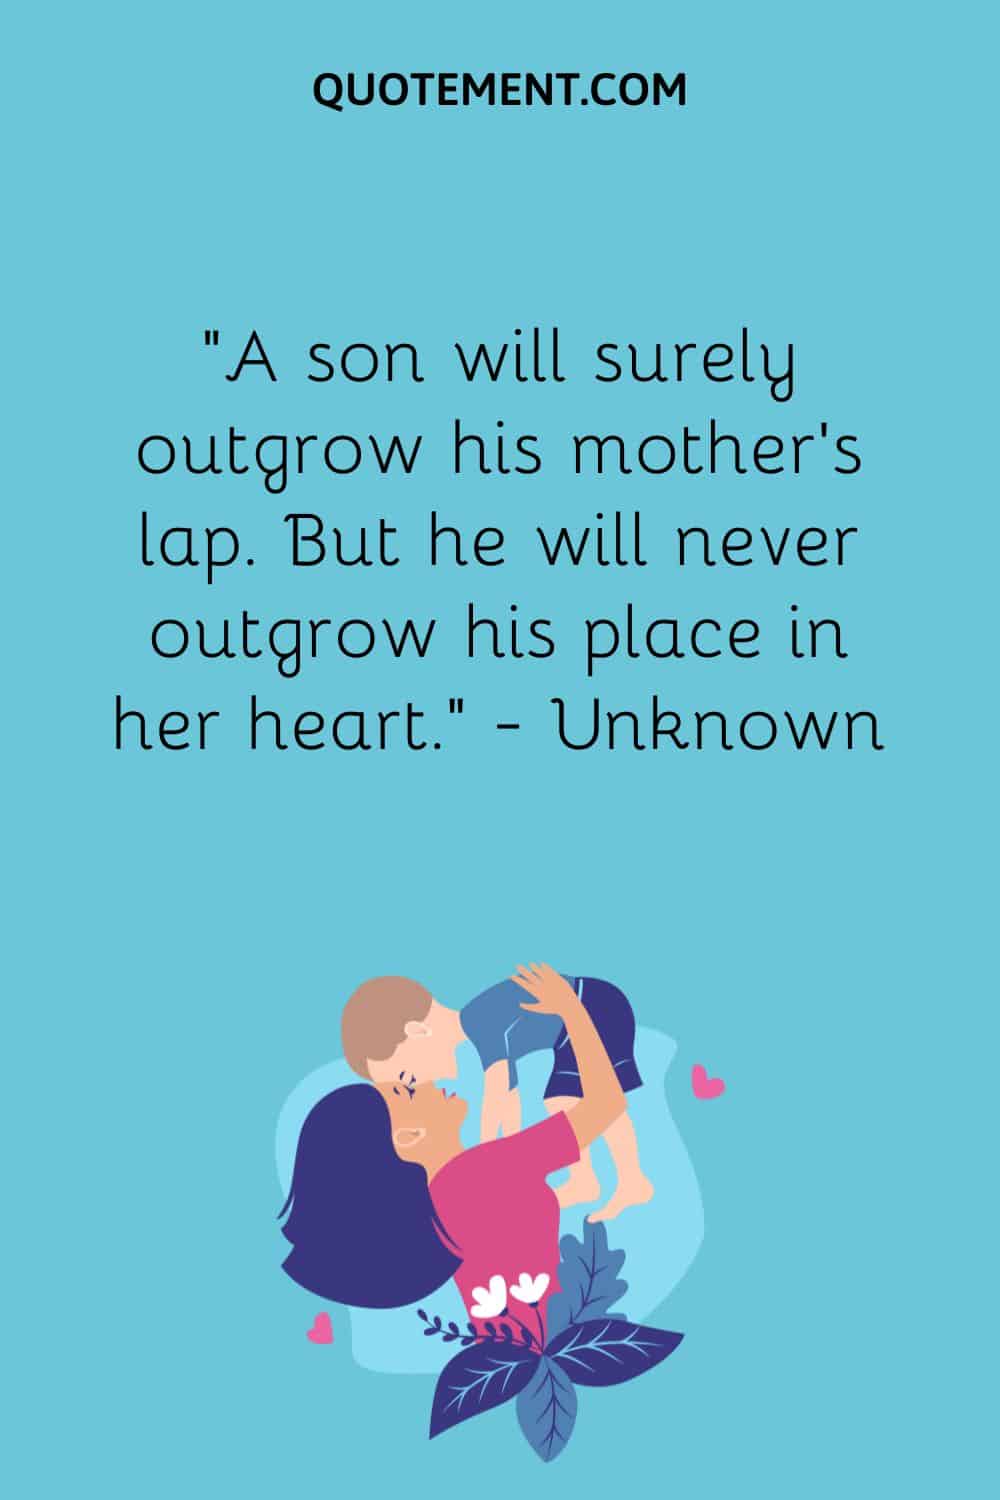 “A son will surely outgrow his mother’s lap. But he will never outgrow his place in her heart.” — Unknown